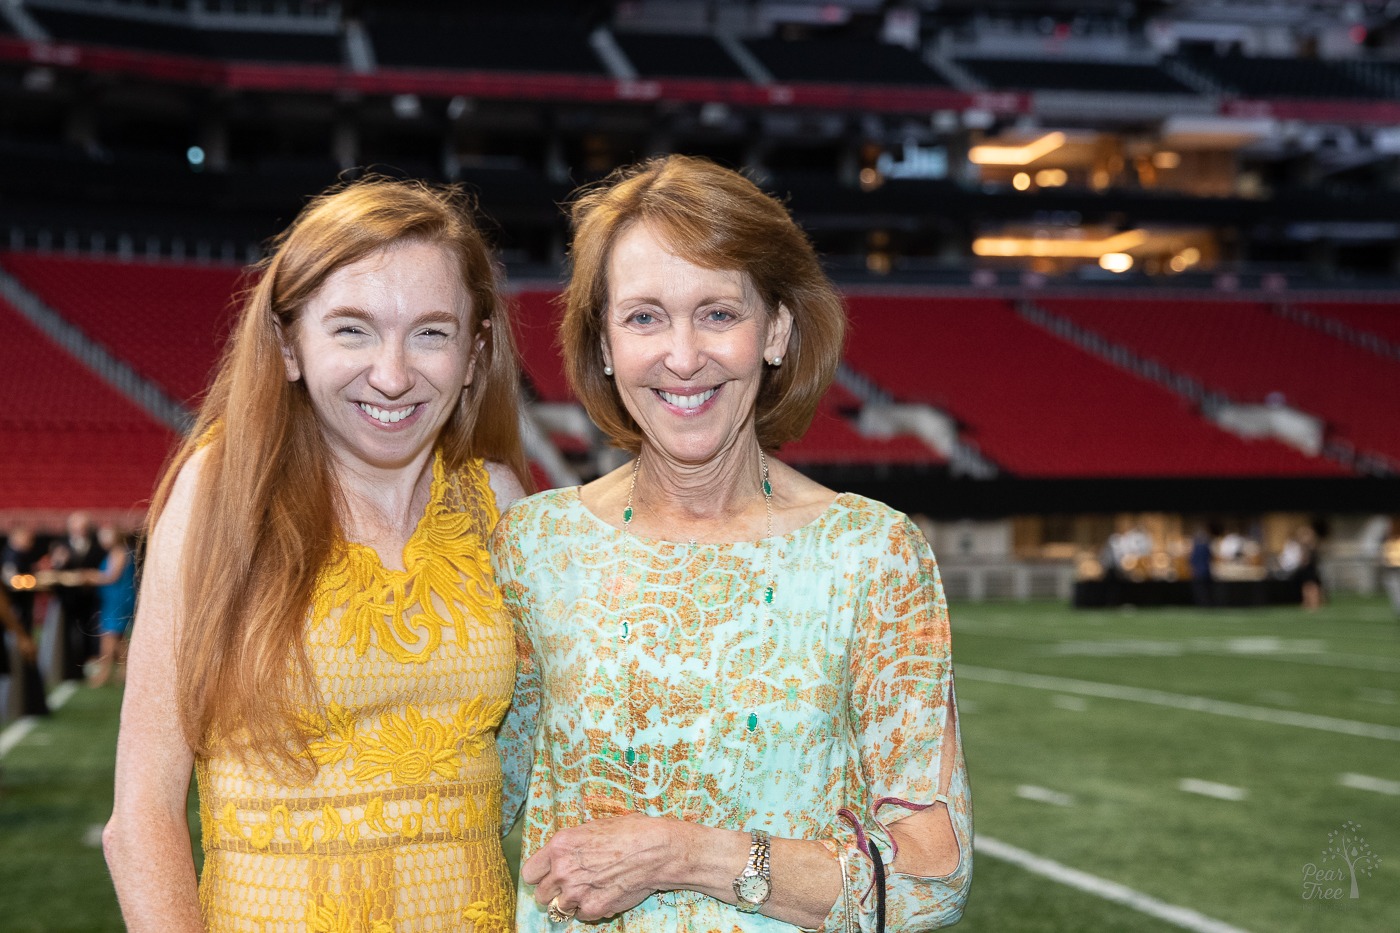 Mother/daughter smiling inside the Atlanta Mercedes Benz stadium before the Night of Broadway Stars hosted by Covenant House Georgia